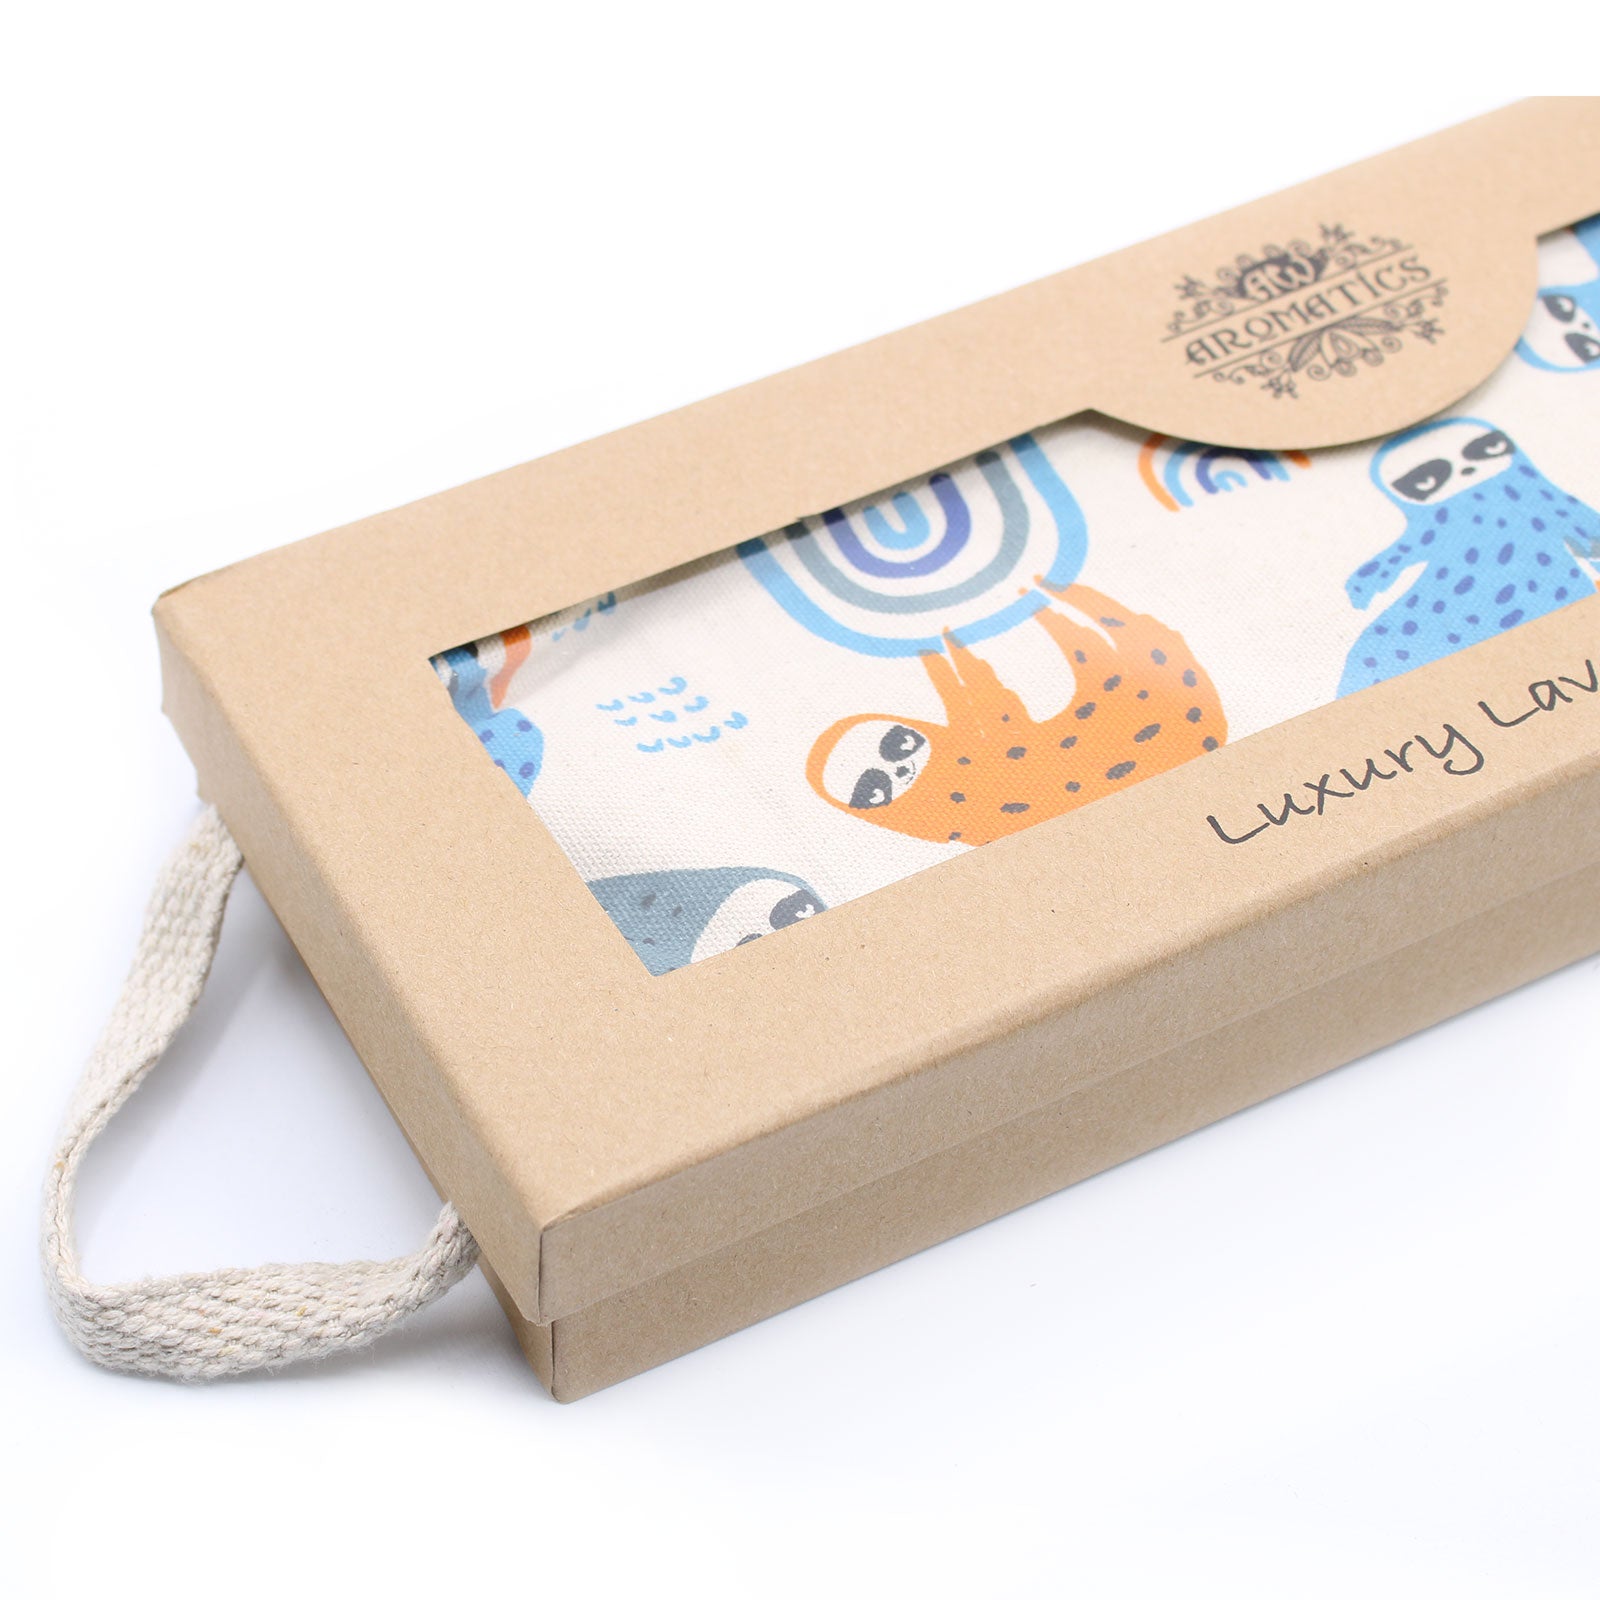 Luxury Lavender Wheat Bag in Gift Box - Lazy Sloth